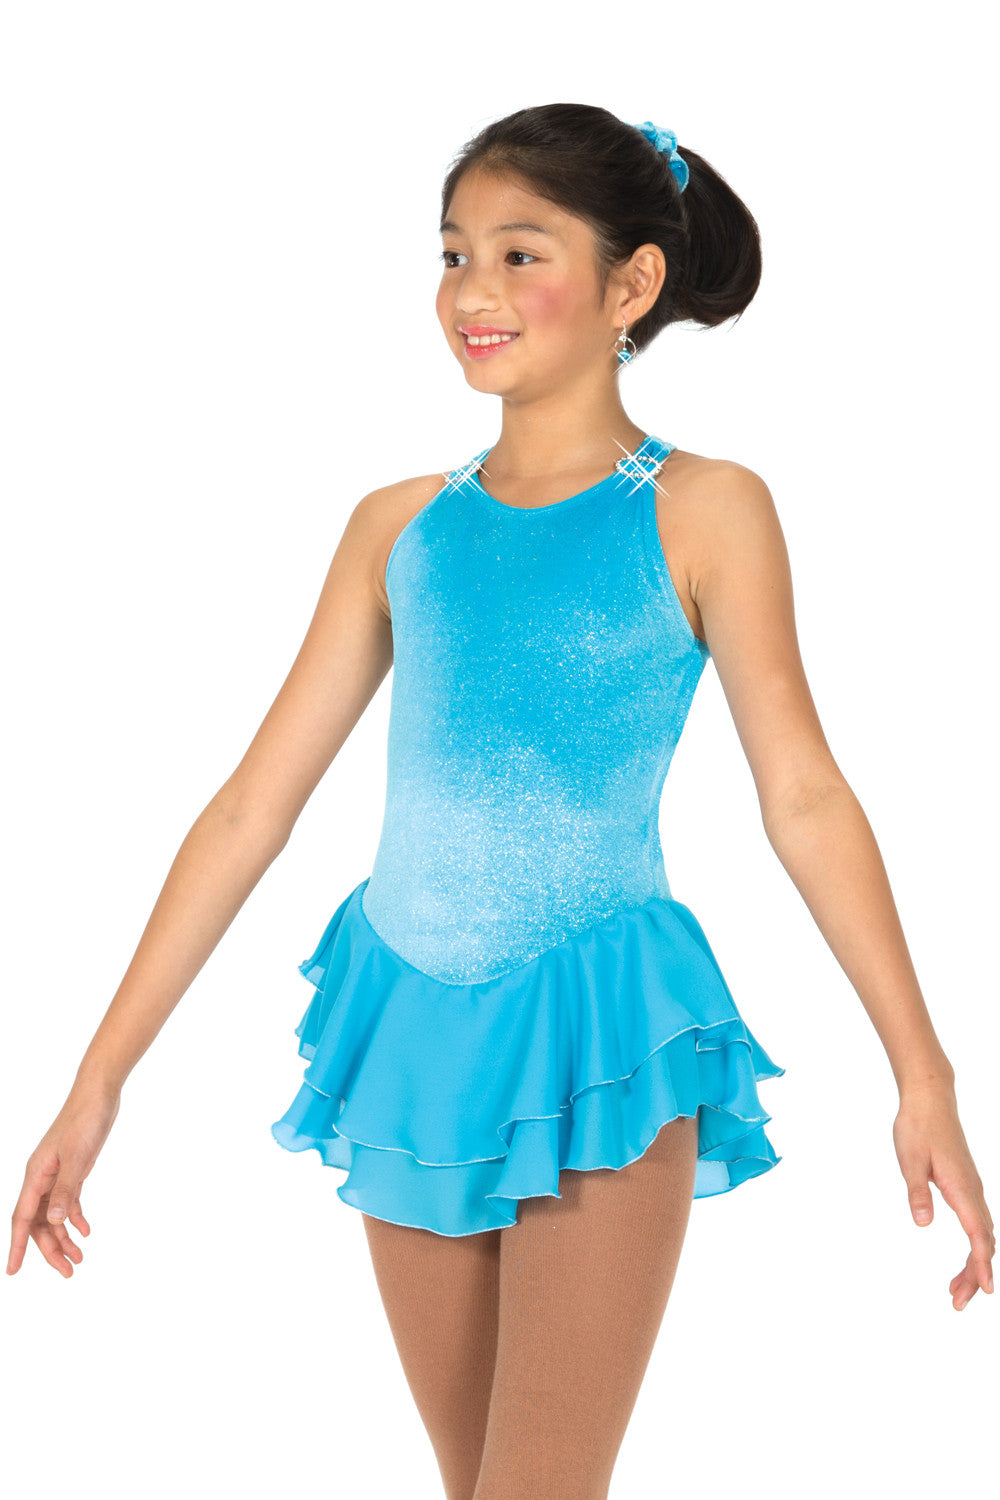 Jerry's 010 Youth 12-14 Ice Shimmer Skate Dress